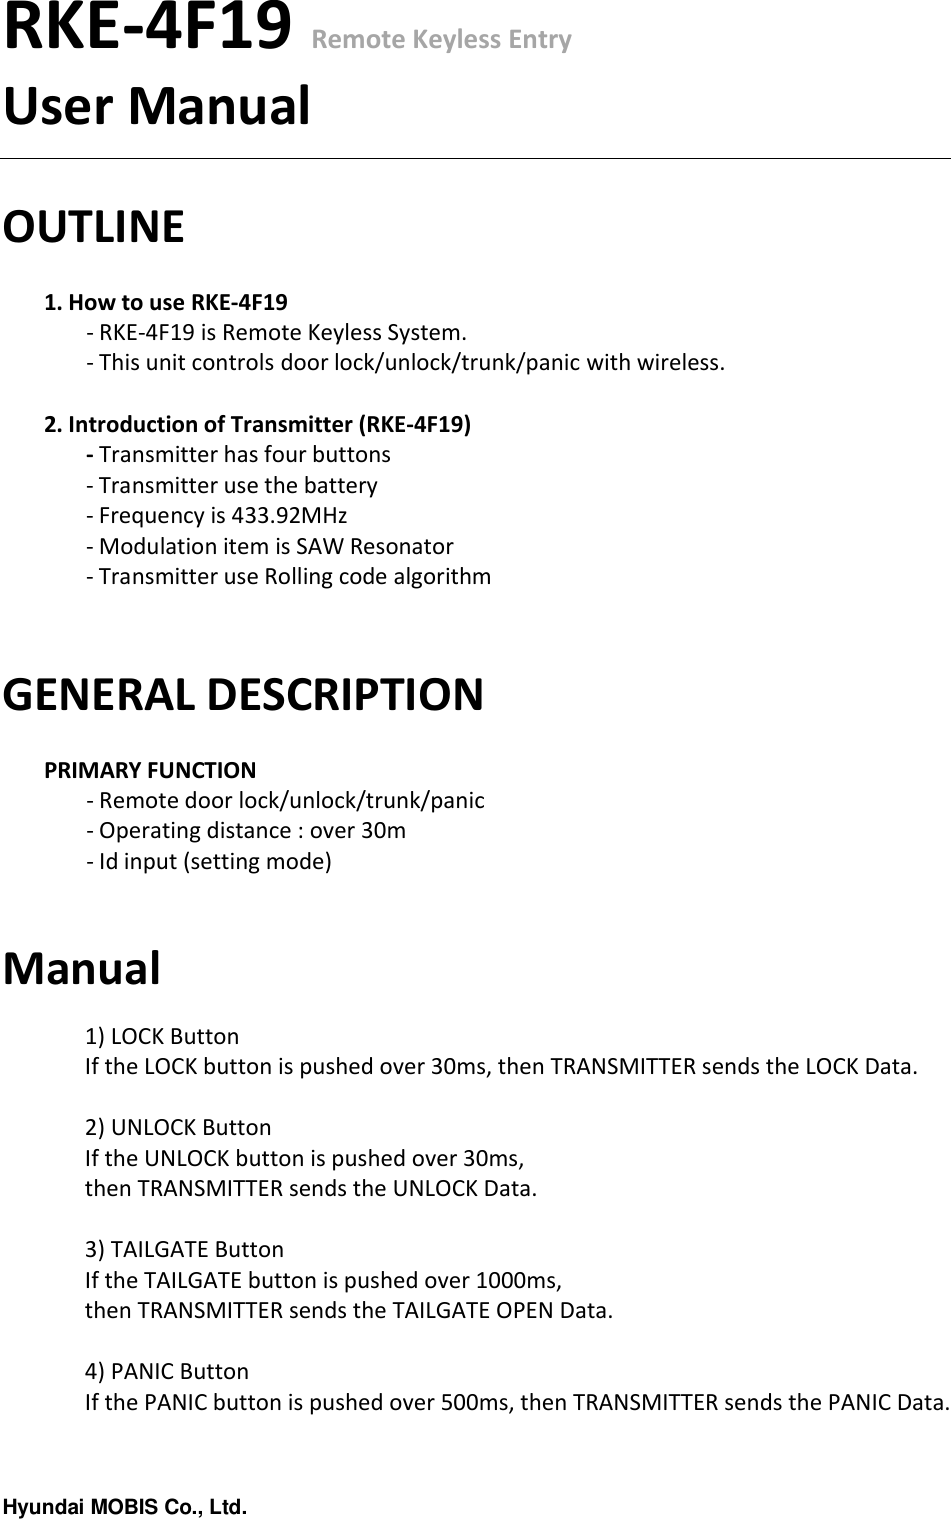 Hyundai MOBIS Co., Ltd.RKE-4F19 Remote Keyless EntryUser ManualOUTLINE1. How to use RKE-4F19- RKE-4F19 is Remote Keyless System.- This unit controls door lock/unlock/trunk/panic with wireless.2. Introduction of Transmitter (RKE-4F19)- Transmitter has four buttons- Transmitter use the battery- Frequency is 433.92MHz- Modulation item is SAW Resonator- Transmitter use Rolling code algorithmGENERAL DESCRIPTIONPRIMARY FUNCTION- Remote door lock/unlock/trunk/panic - Operating distance : over 30m - Id input (setting mode)Manual1) LOCK ButtonIf the LOCK button is pushed over 30ms, then TRANSMITTER sends the LOCK Data.2) UNLOCK ButtonIf the UNLOCK button is pushed over 30ms, then TRANSMITTER sends the UNLOCK Data.3) TAILGATE ButtonIf the TAILGATE button is pushed over 1000ms, then TRANSMITTER sends the TAILGATE OPEN Data.4) PANIC ButtonIf the PANIC button is pushed over 500ms, then TRANSMITTER sends the PANIC Data.